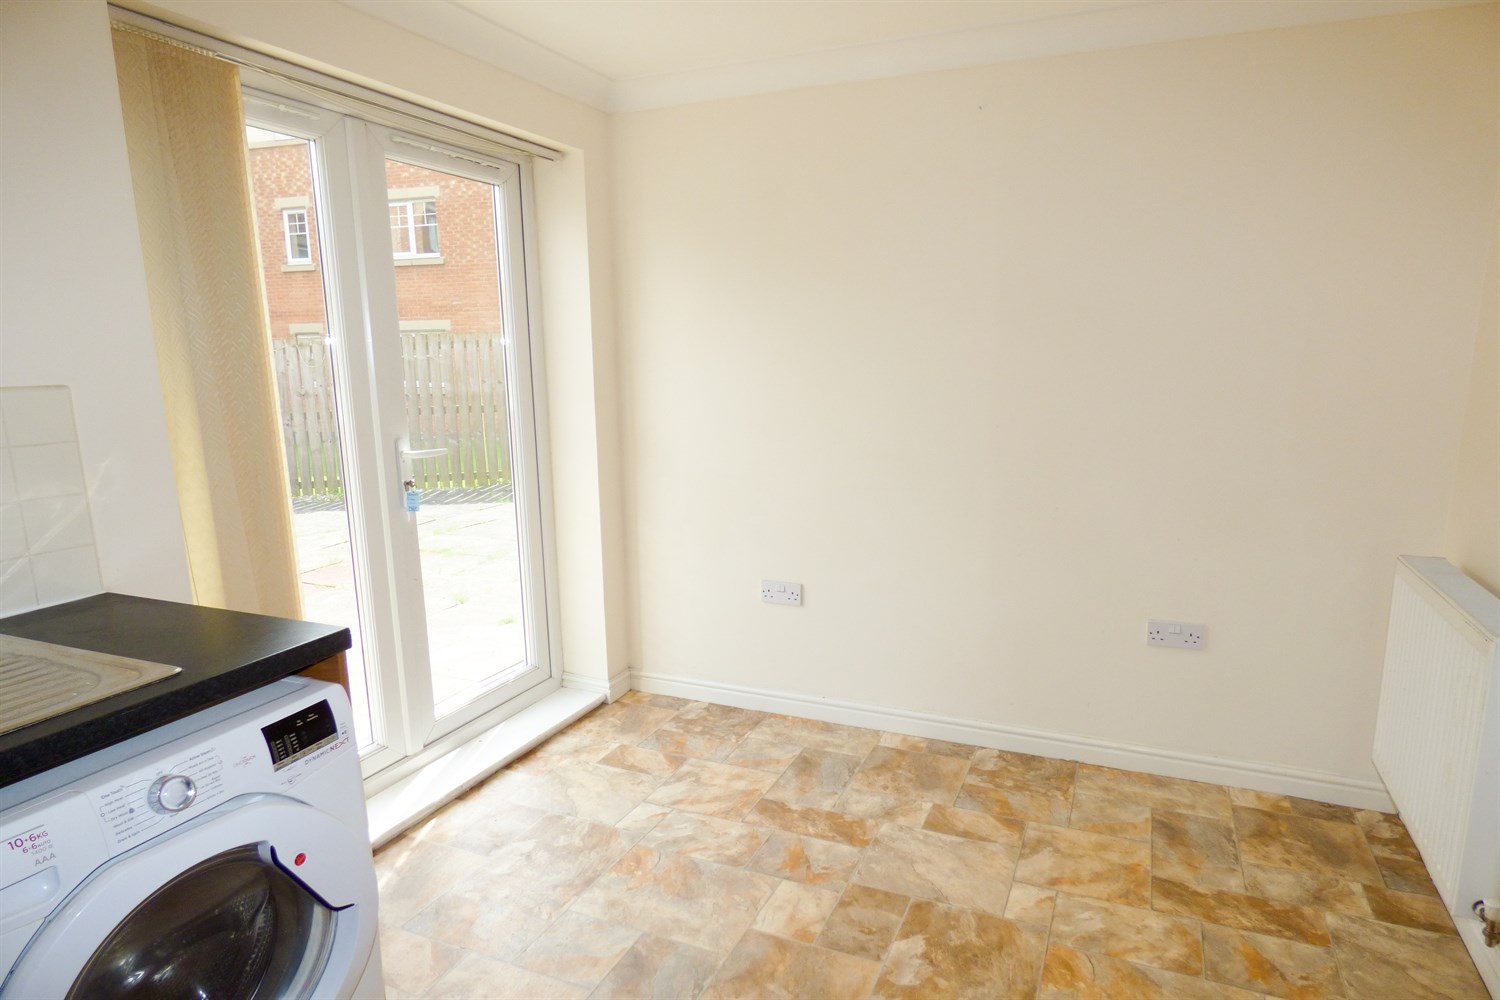 3 bed end of terraced town house for sale in Sanderson Villas, Gateshead  - Property Image 6